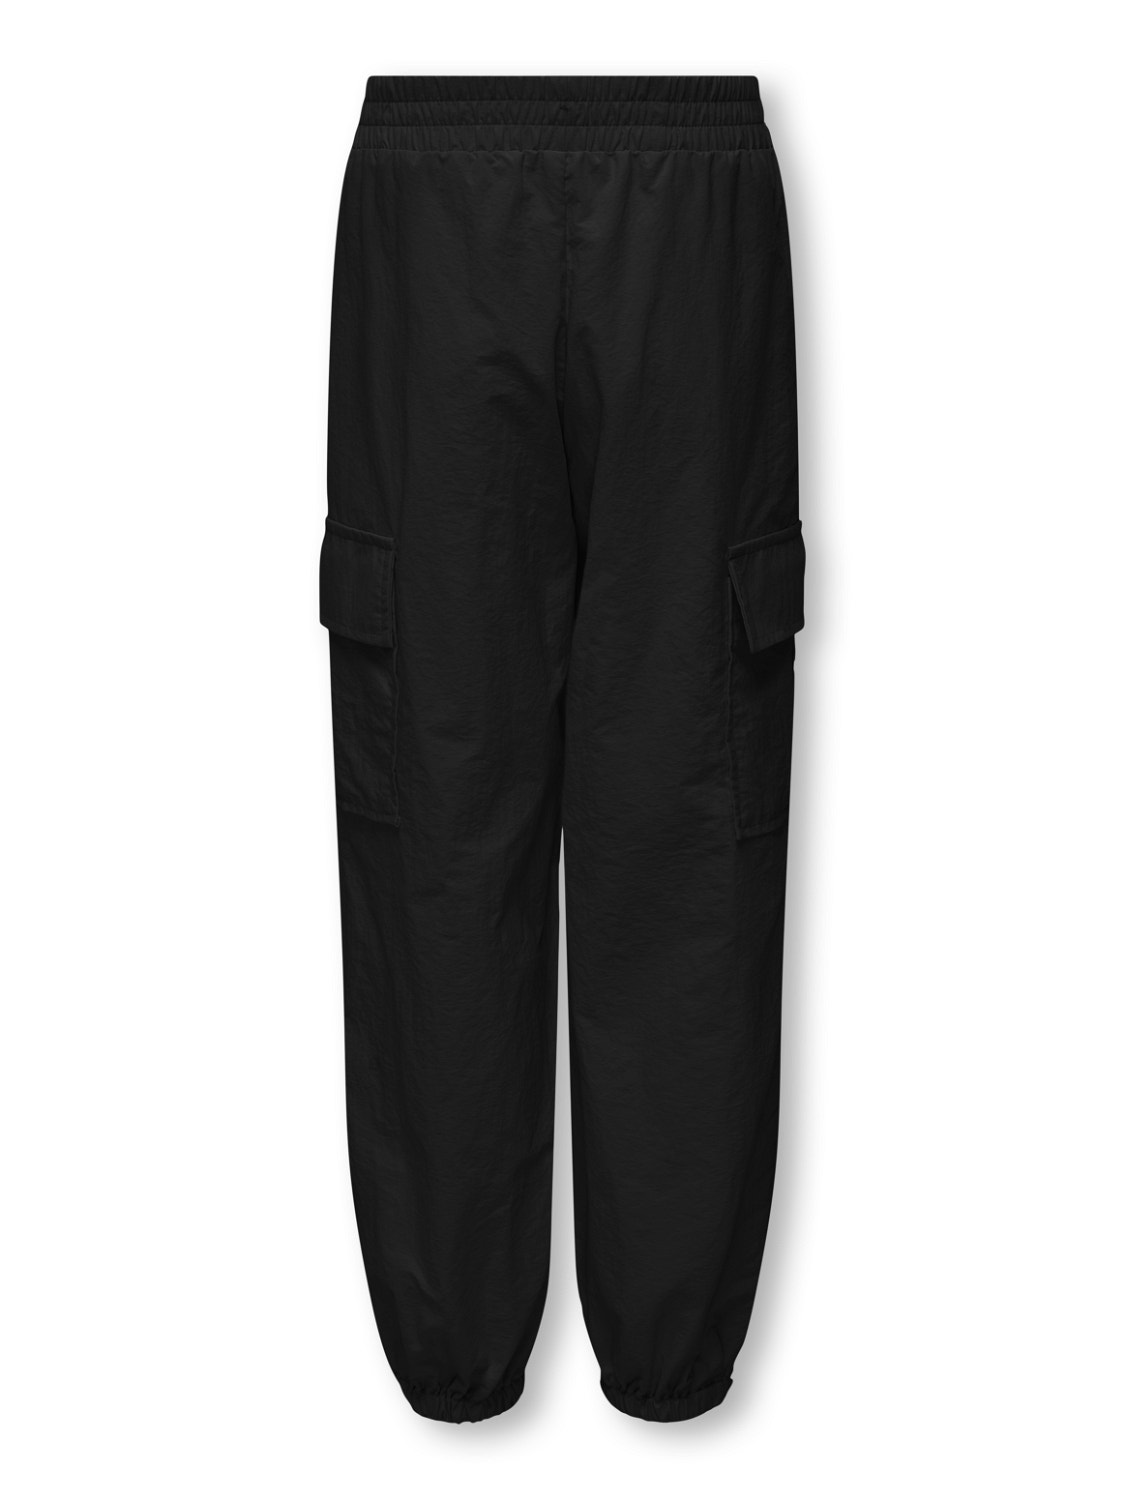 ONLY Loose Fit Mid waist Elasticated hems Track Pants -Black - 15304165